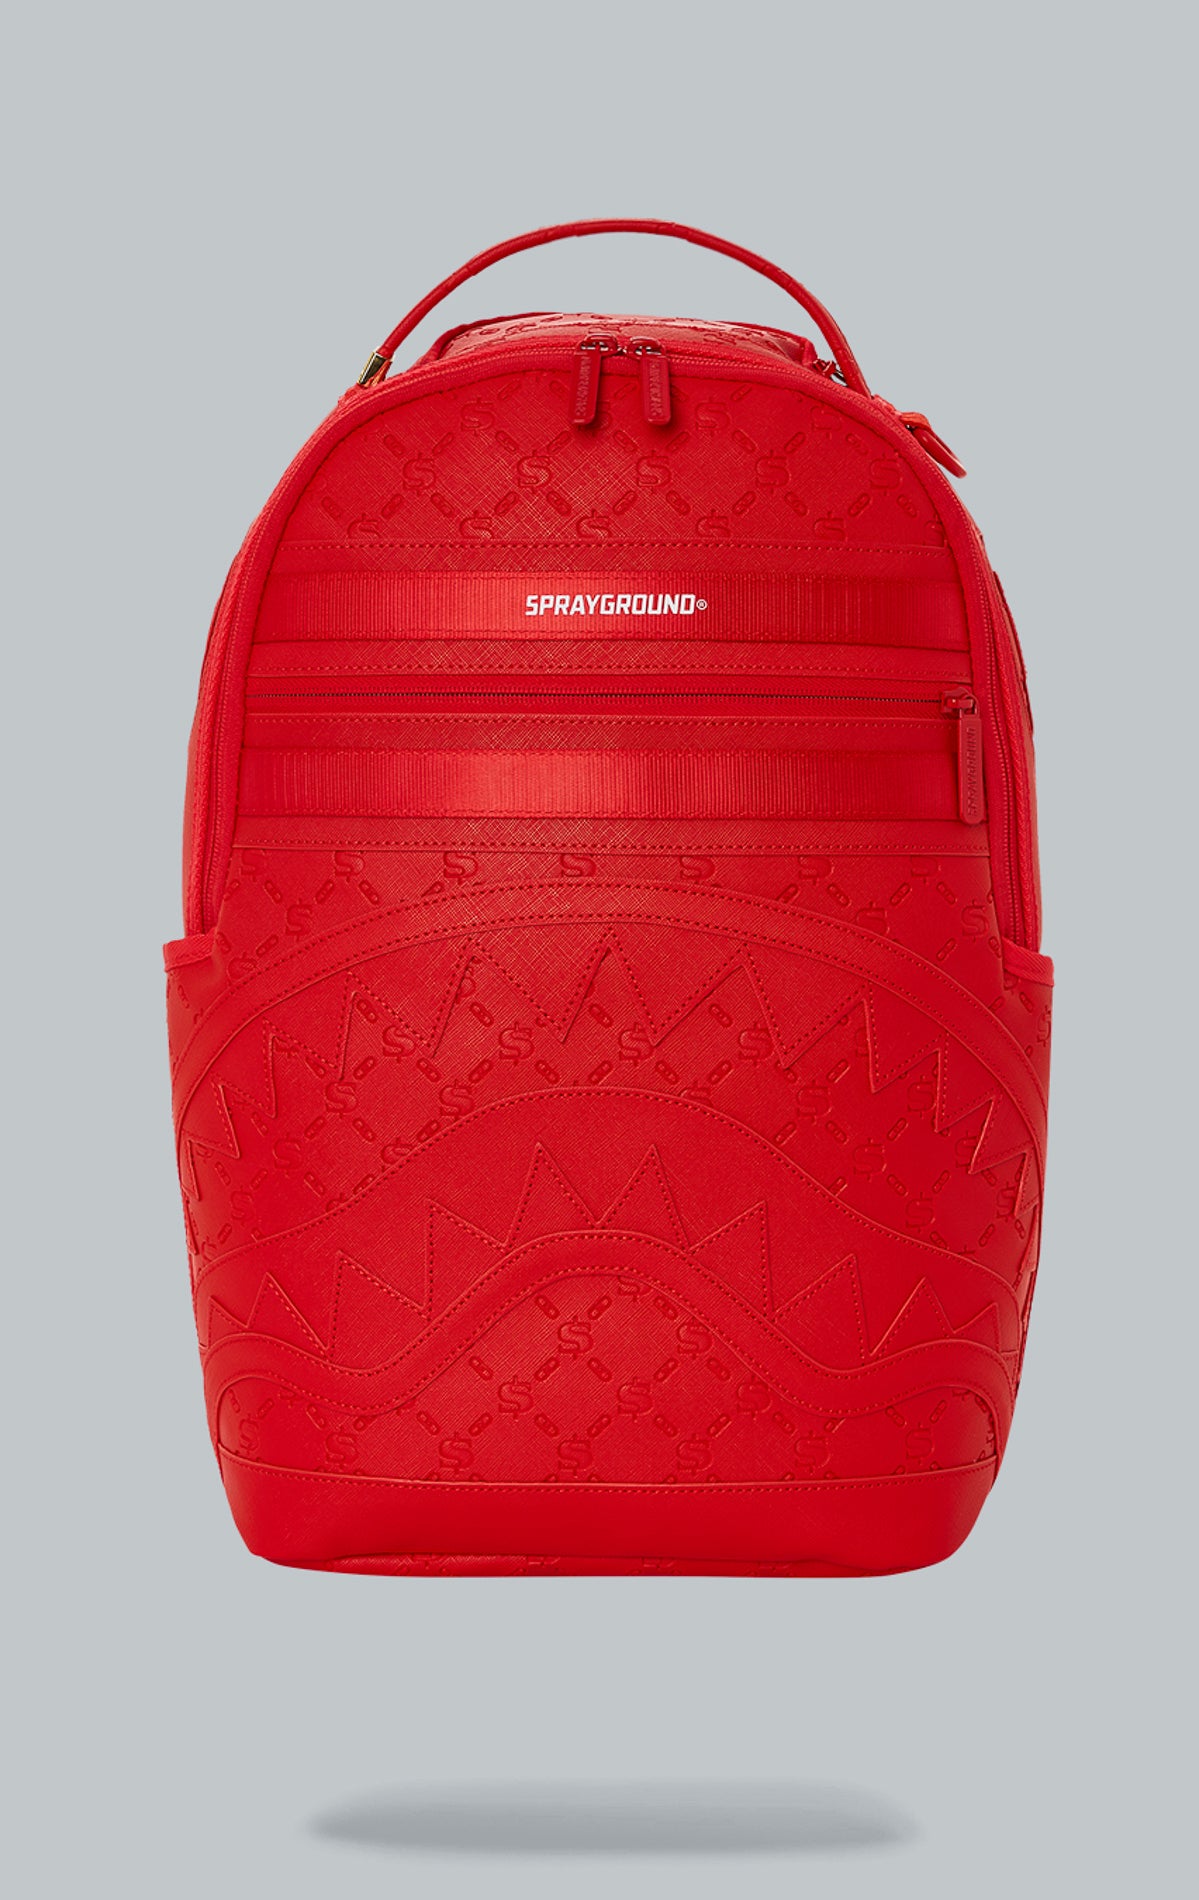 Sprayground Deniro Red Backpack. The backpack is made from durable water-resistant faux leather (100%) and features a red exterior. It includes a front zipper pocket, side pockets, a zippered stash pocket, a separate velour sunglass compartment, ergonomic mesh back padding, adjustable straps, gold zippers with metal hardware, and a metal 